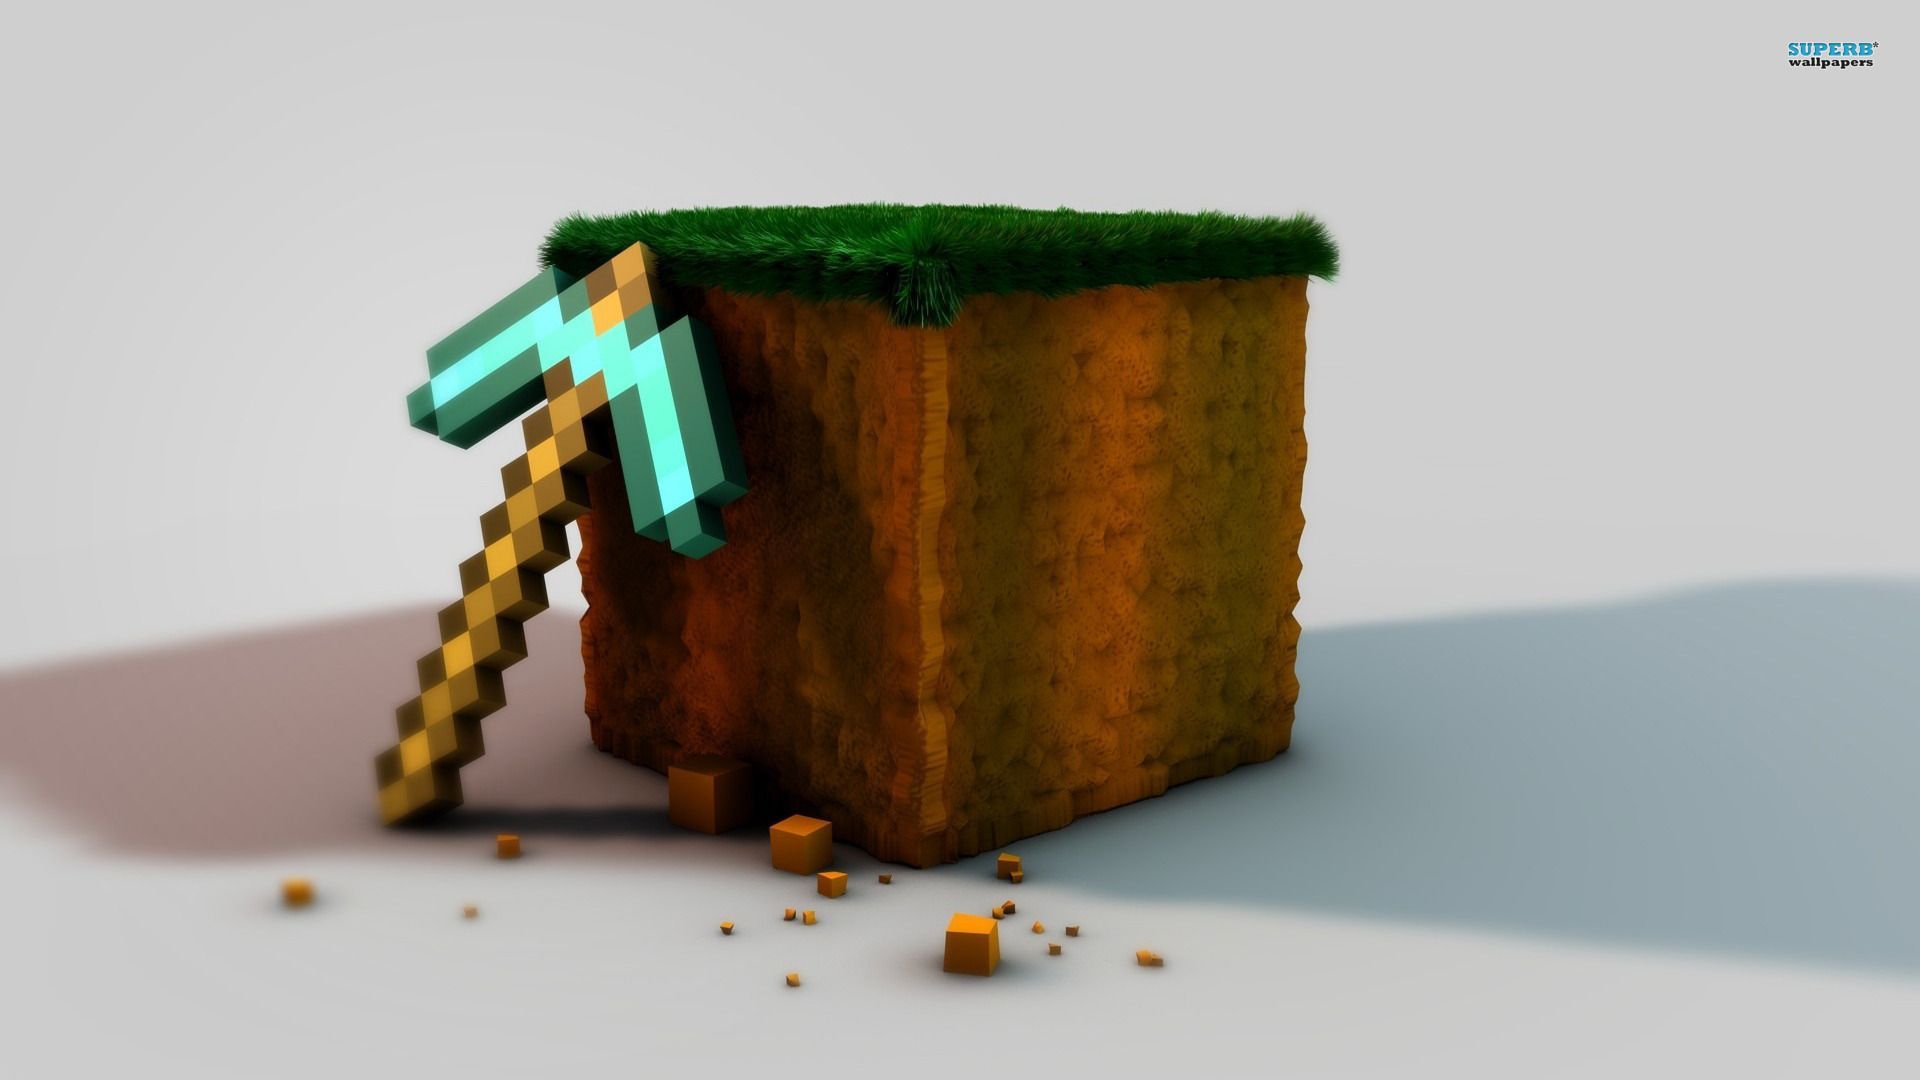 Minecraft wallpaper - Game wallpapers - #14760